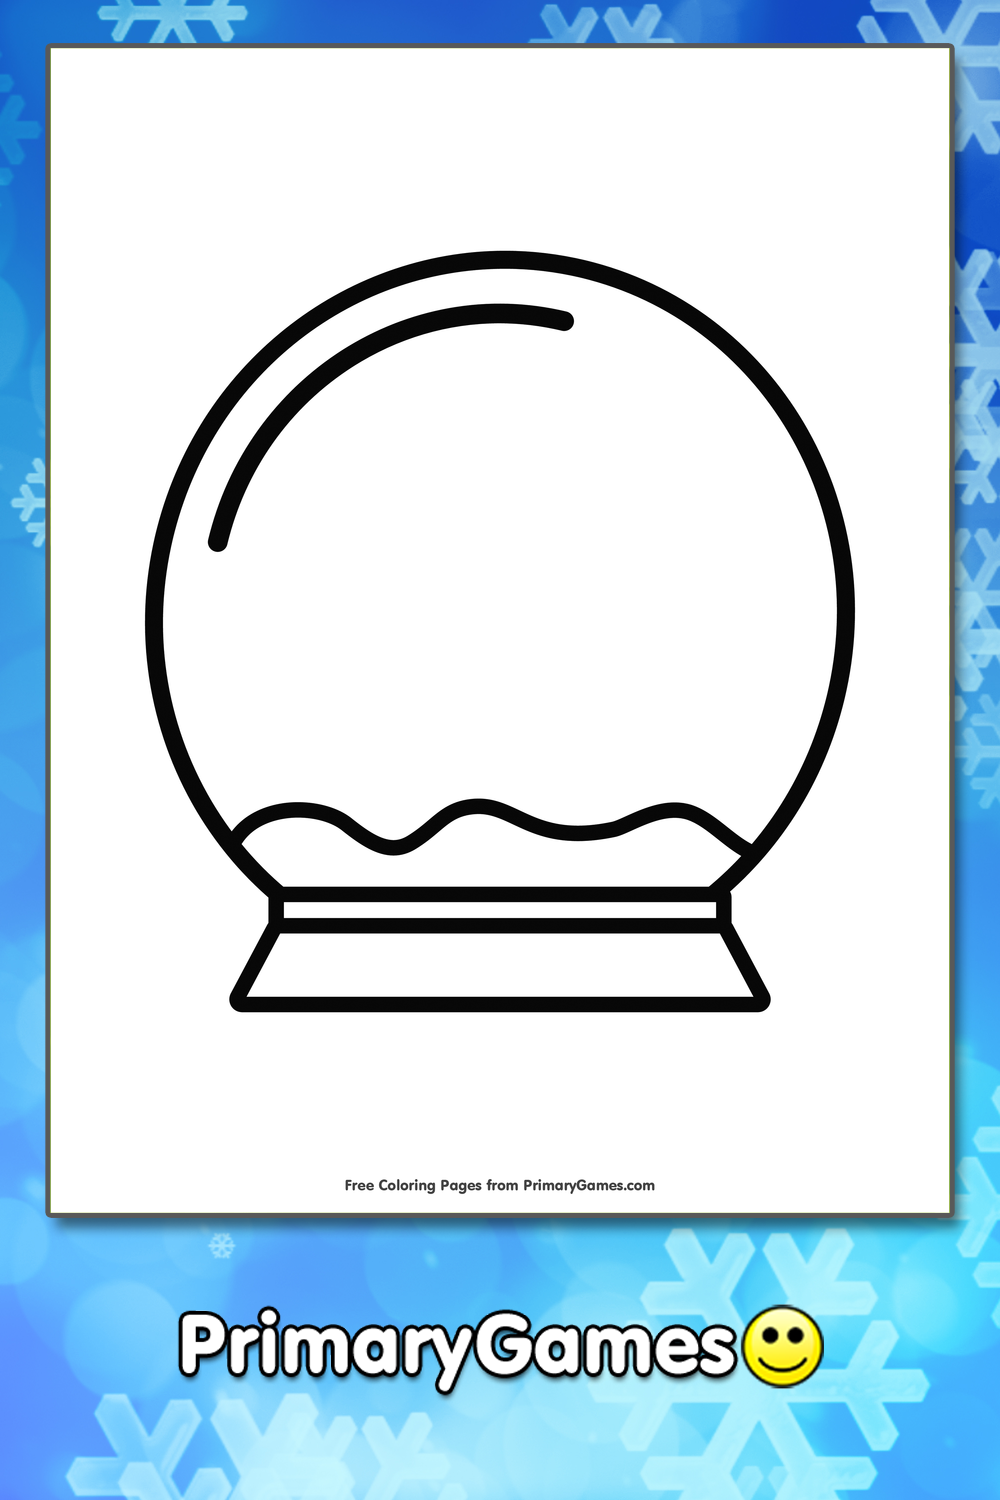 Blank snowglobe coloring page â free printable pdf from